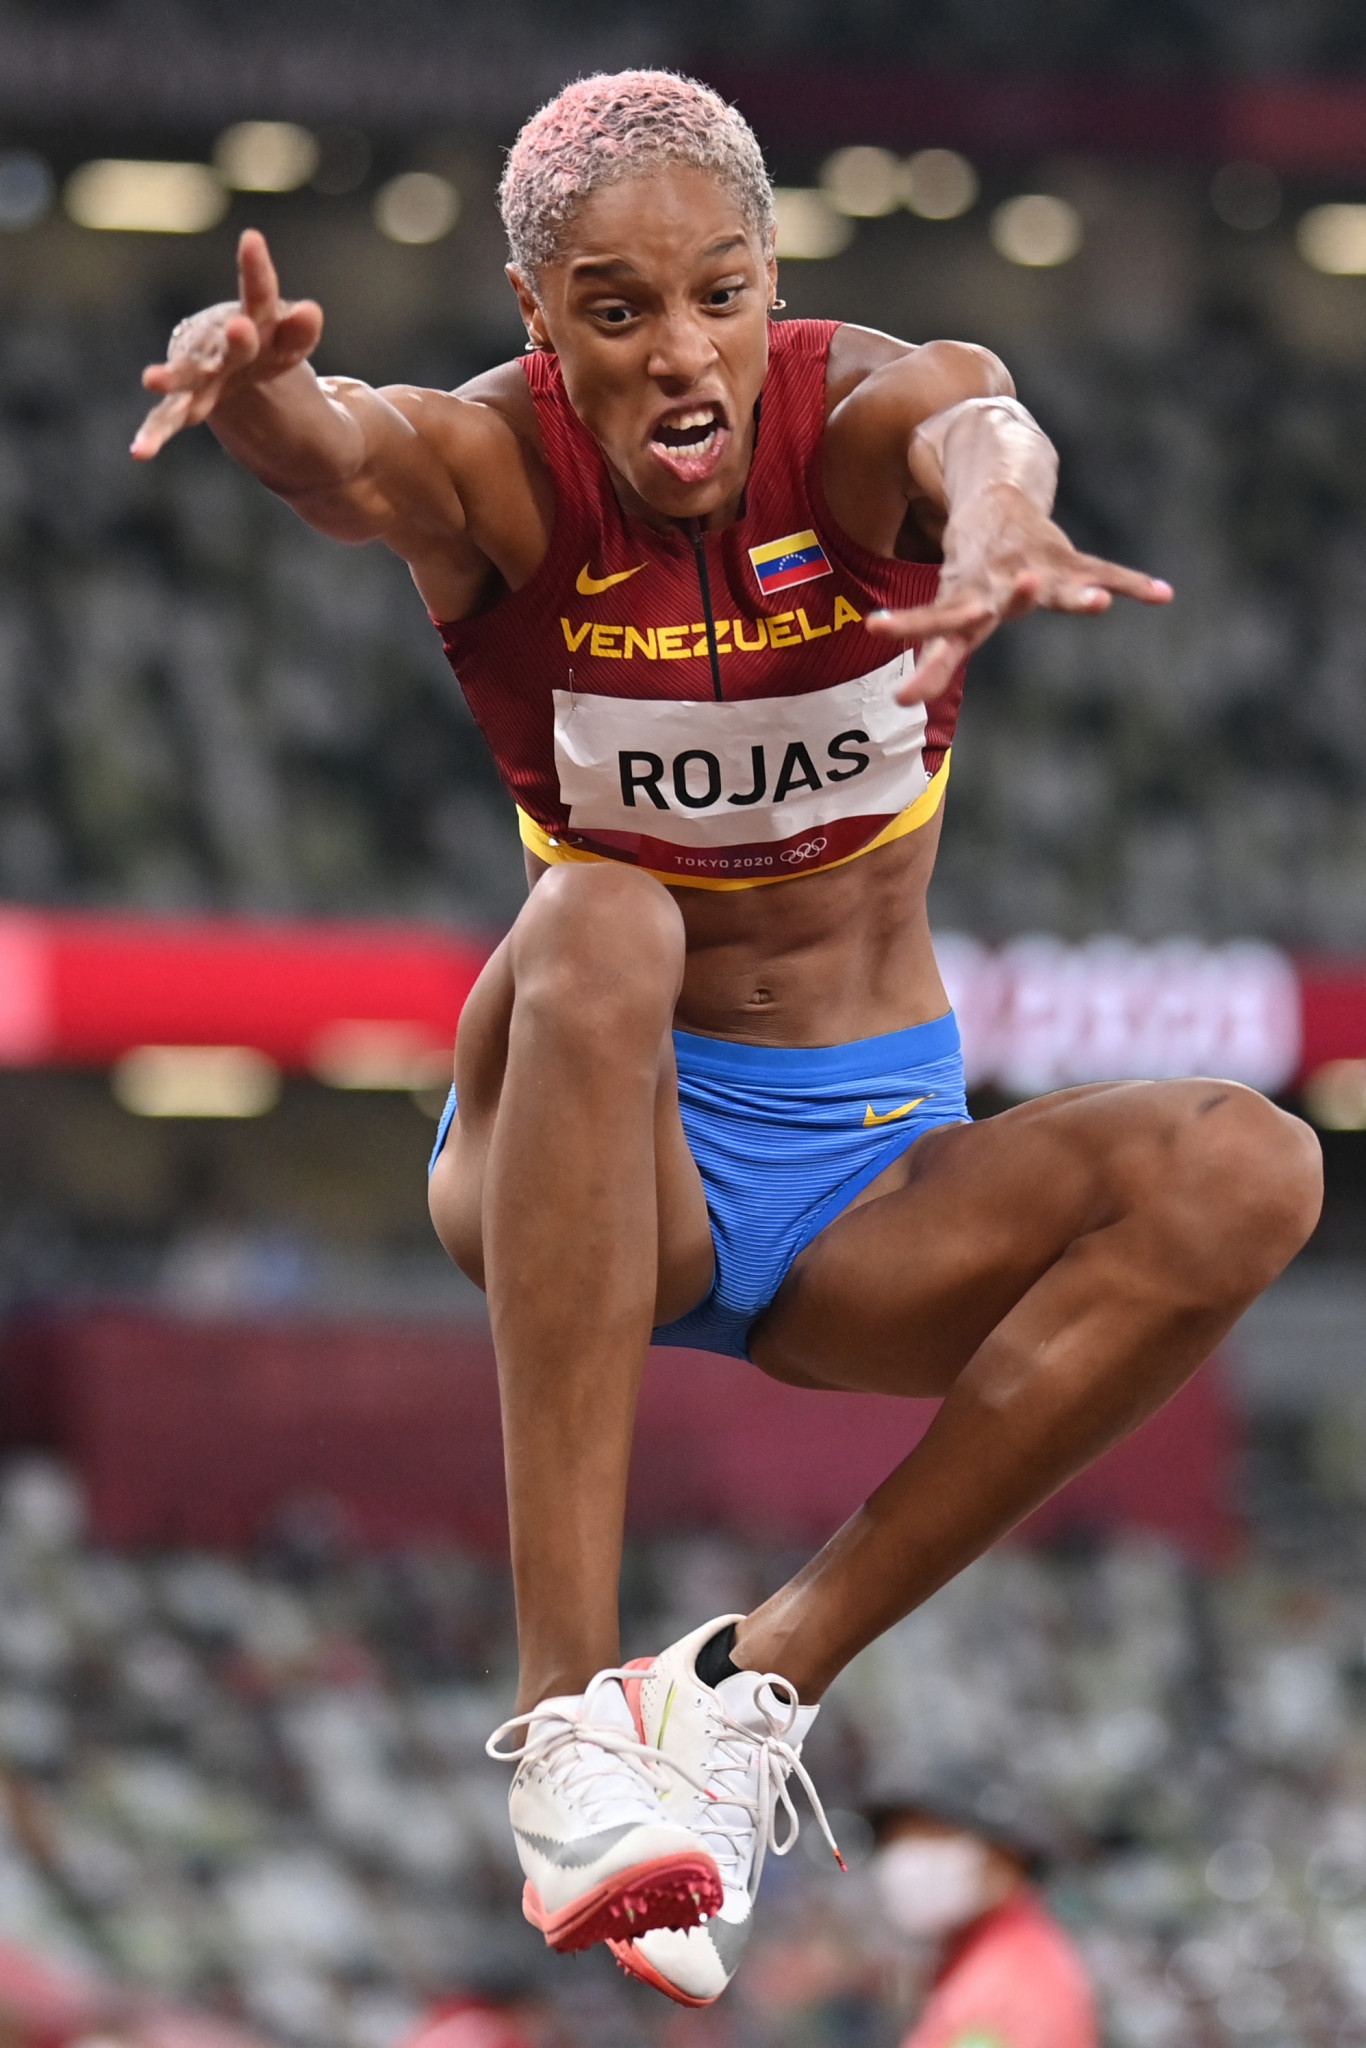 Yulimar Rojas set a world record in the triple jump when winning the Olympic gold medal at Tokyo 2020 and will be seeking a third consecutive World Championships title in Eugene ©Getty Images